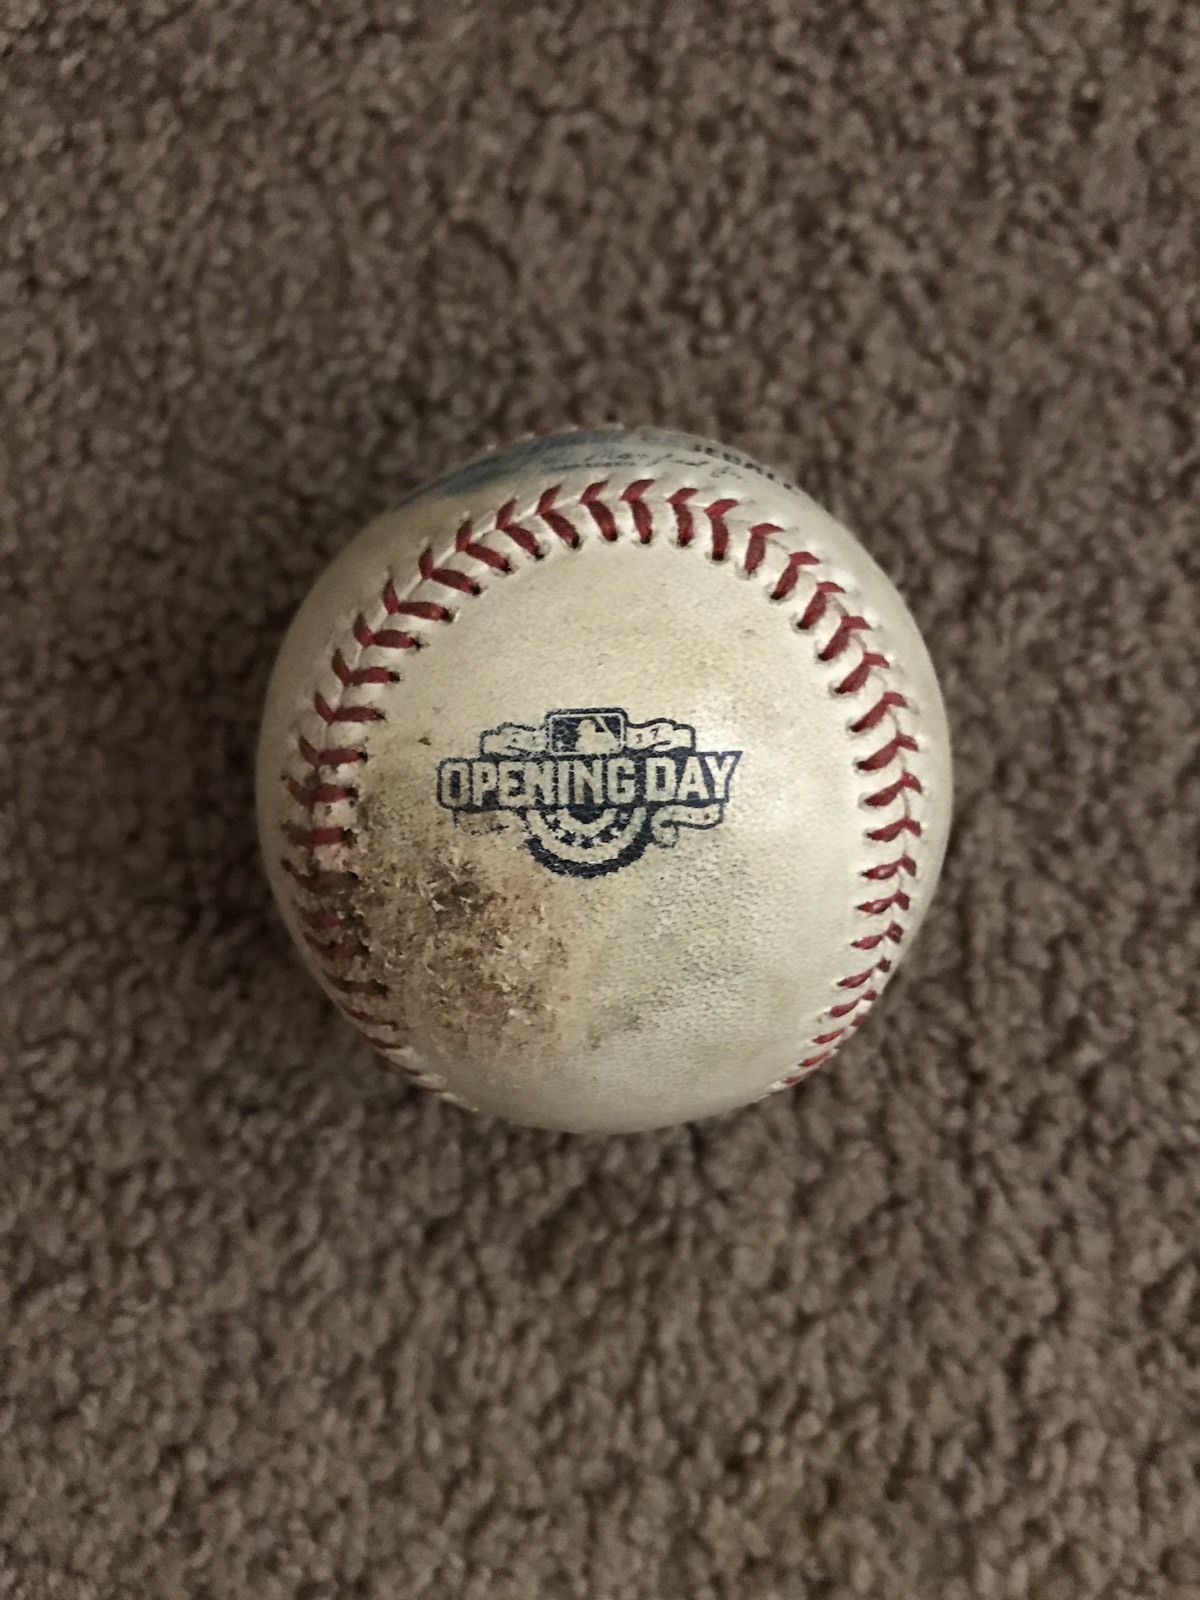 4/03/2017 Red Sox Opening Day Game-Used ball